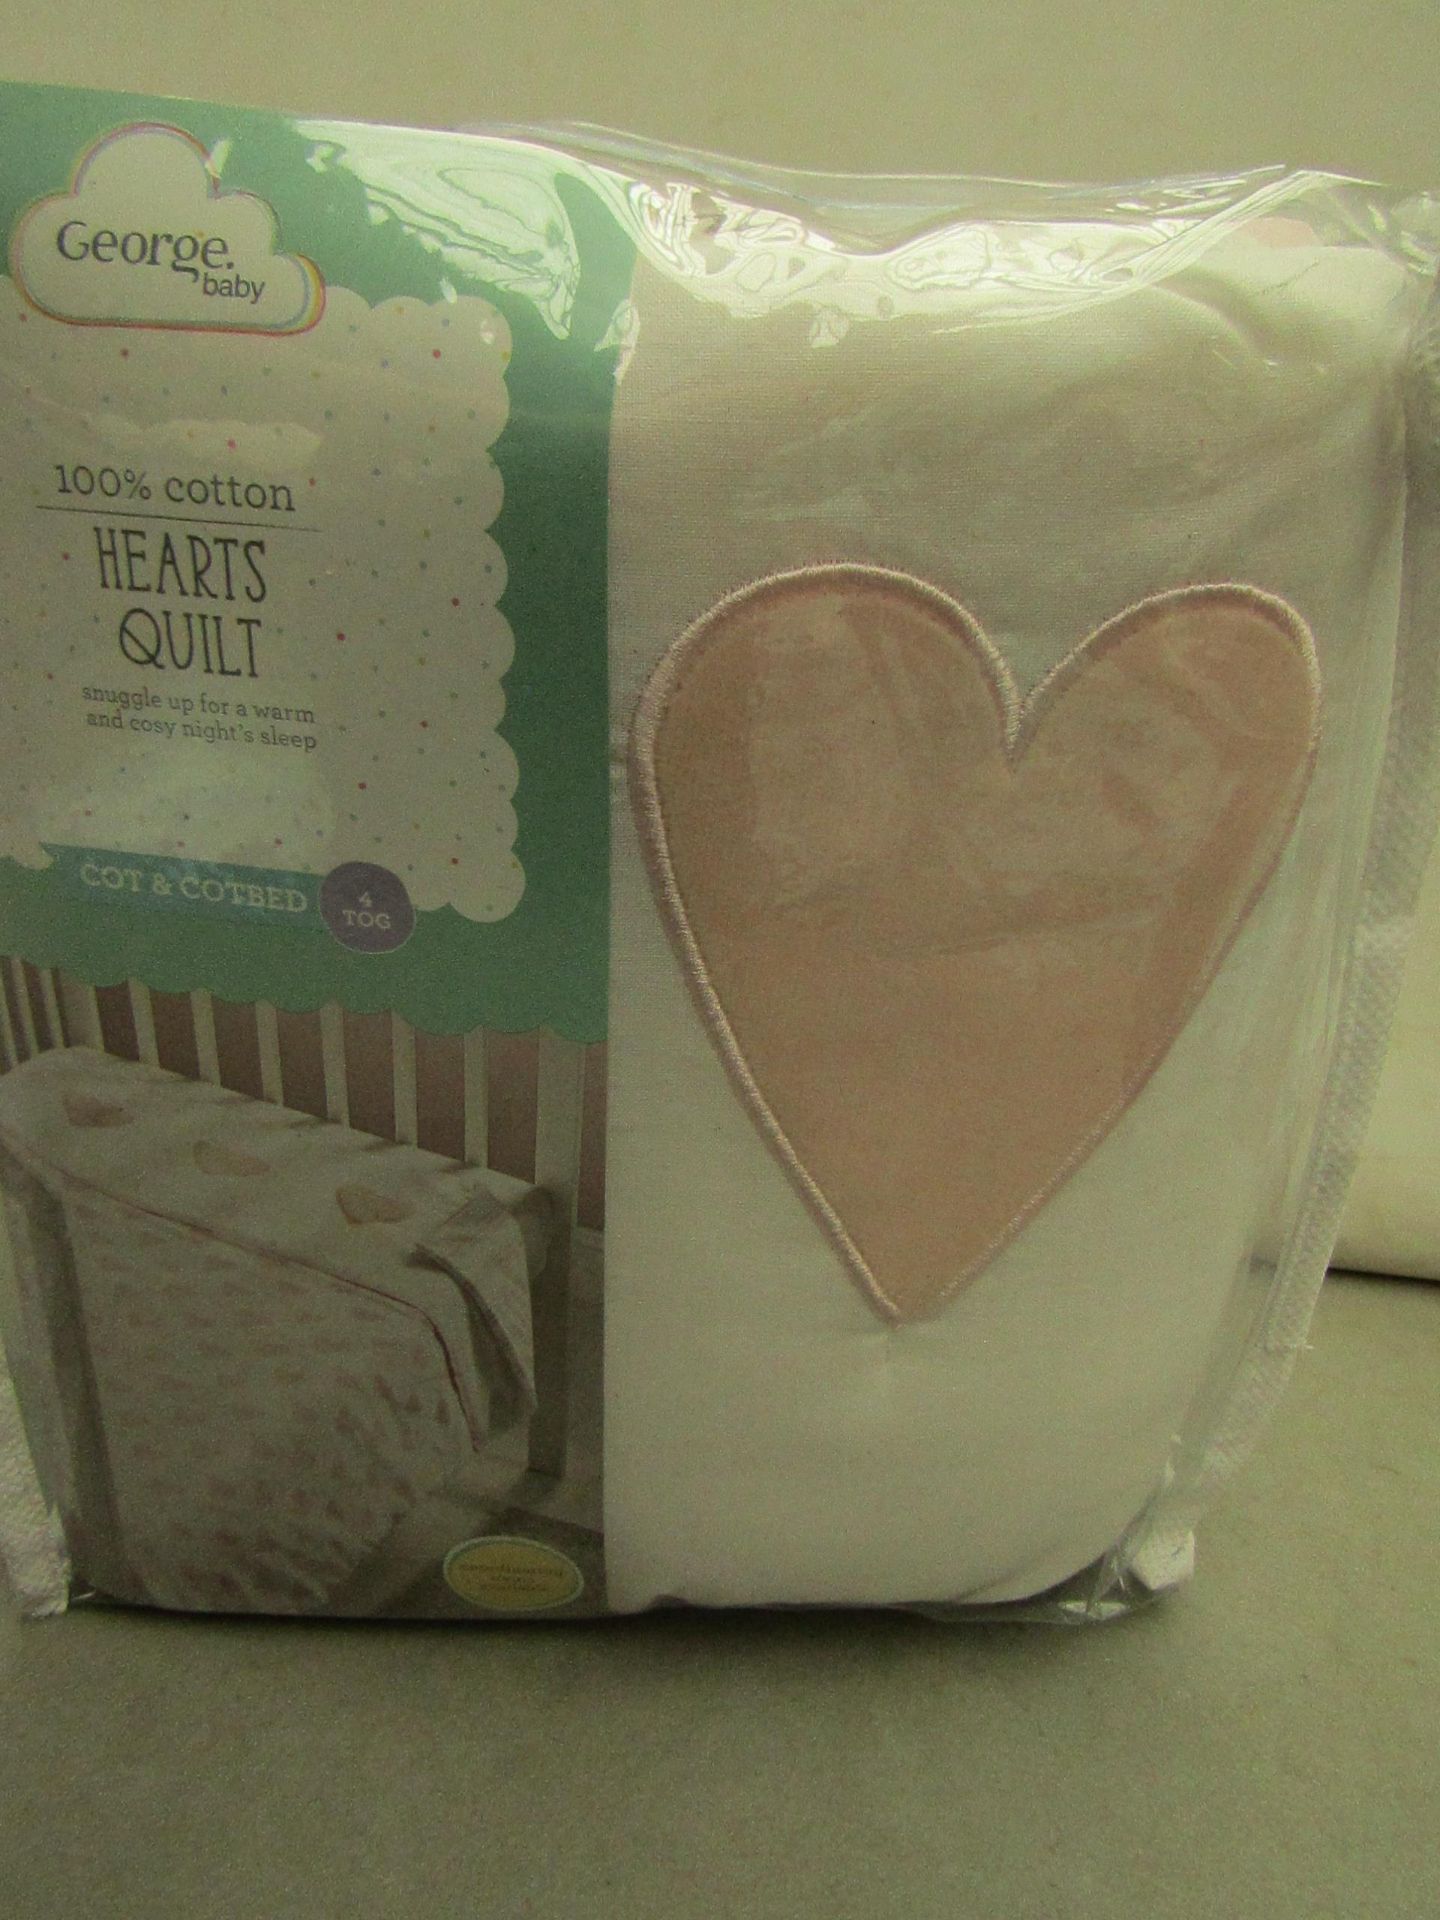 George Baby - Hearts Quilt (Cot & Cotbed) - All New & Packaged.